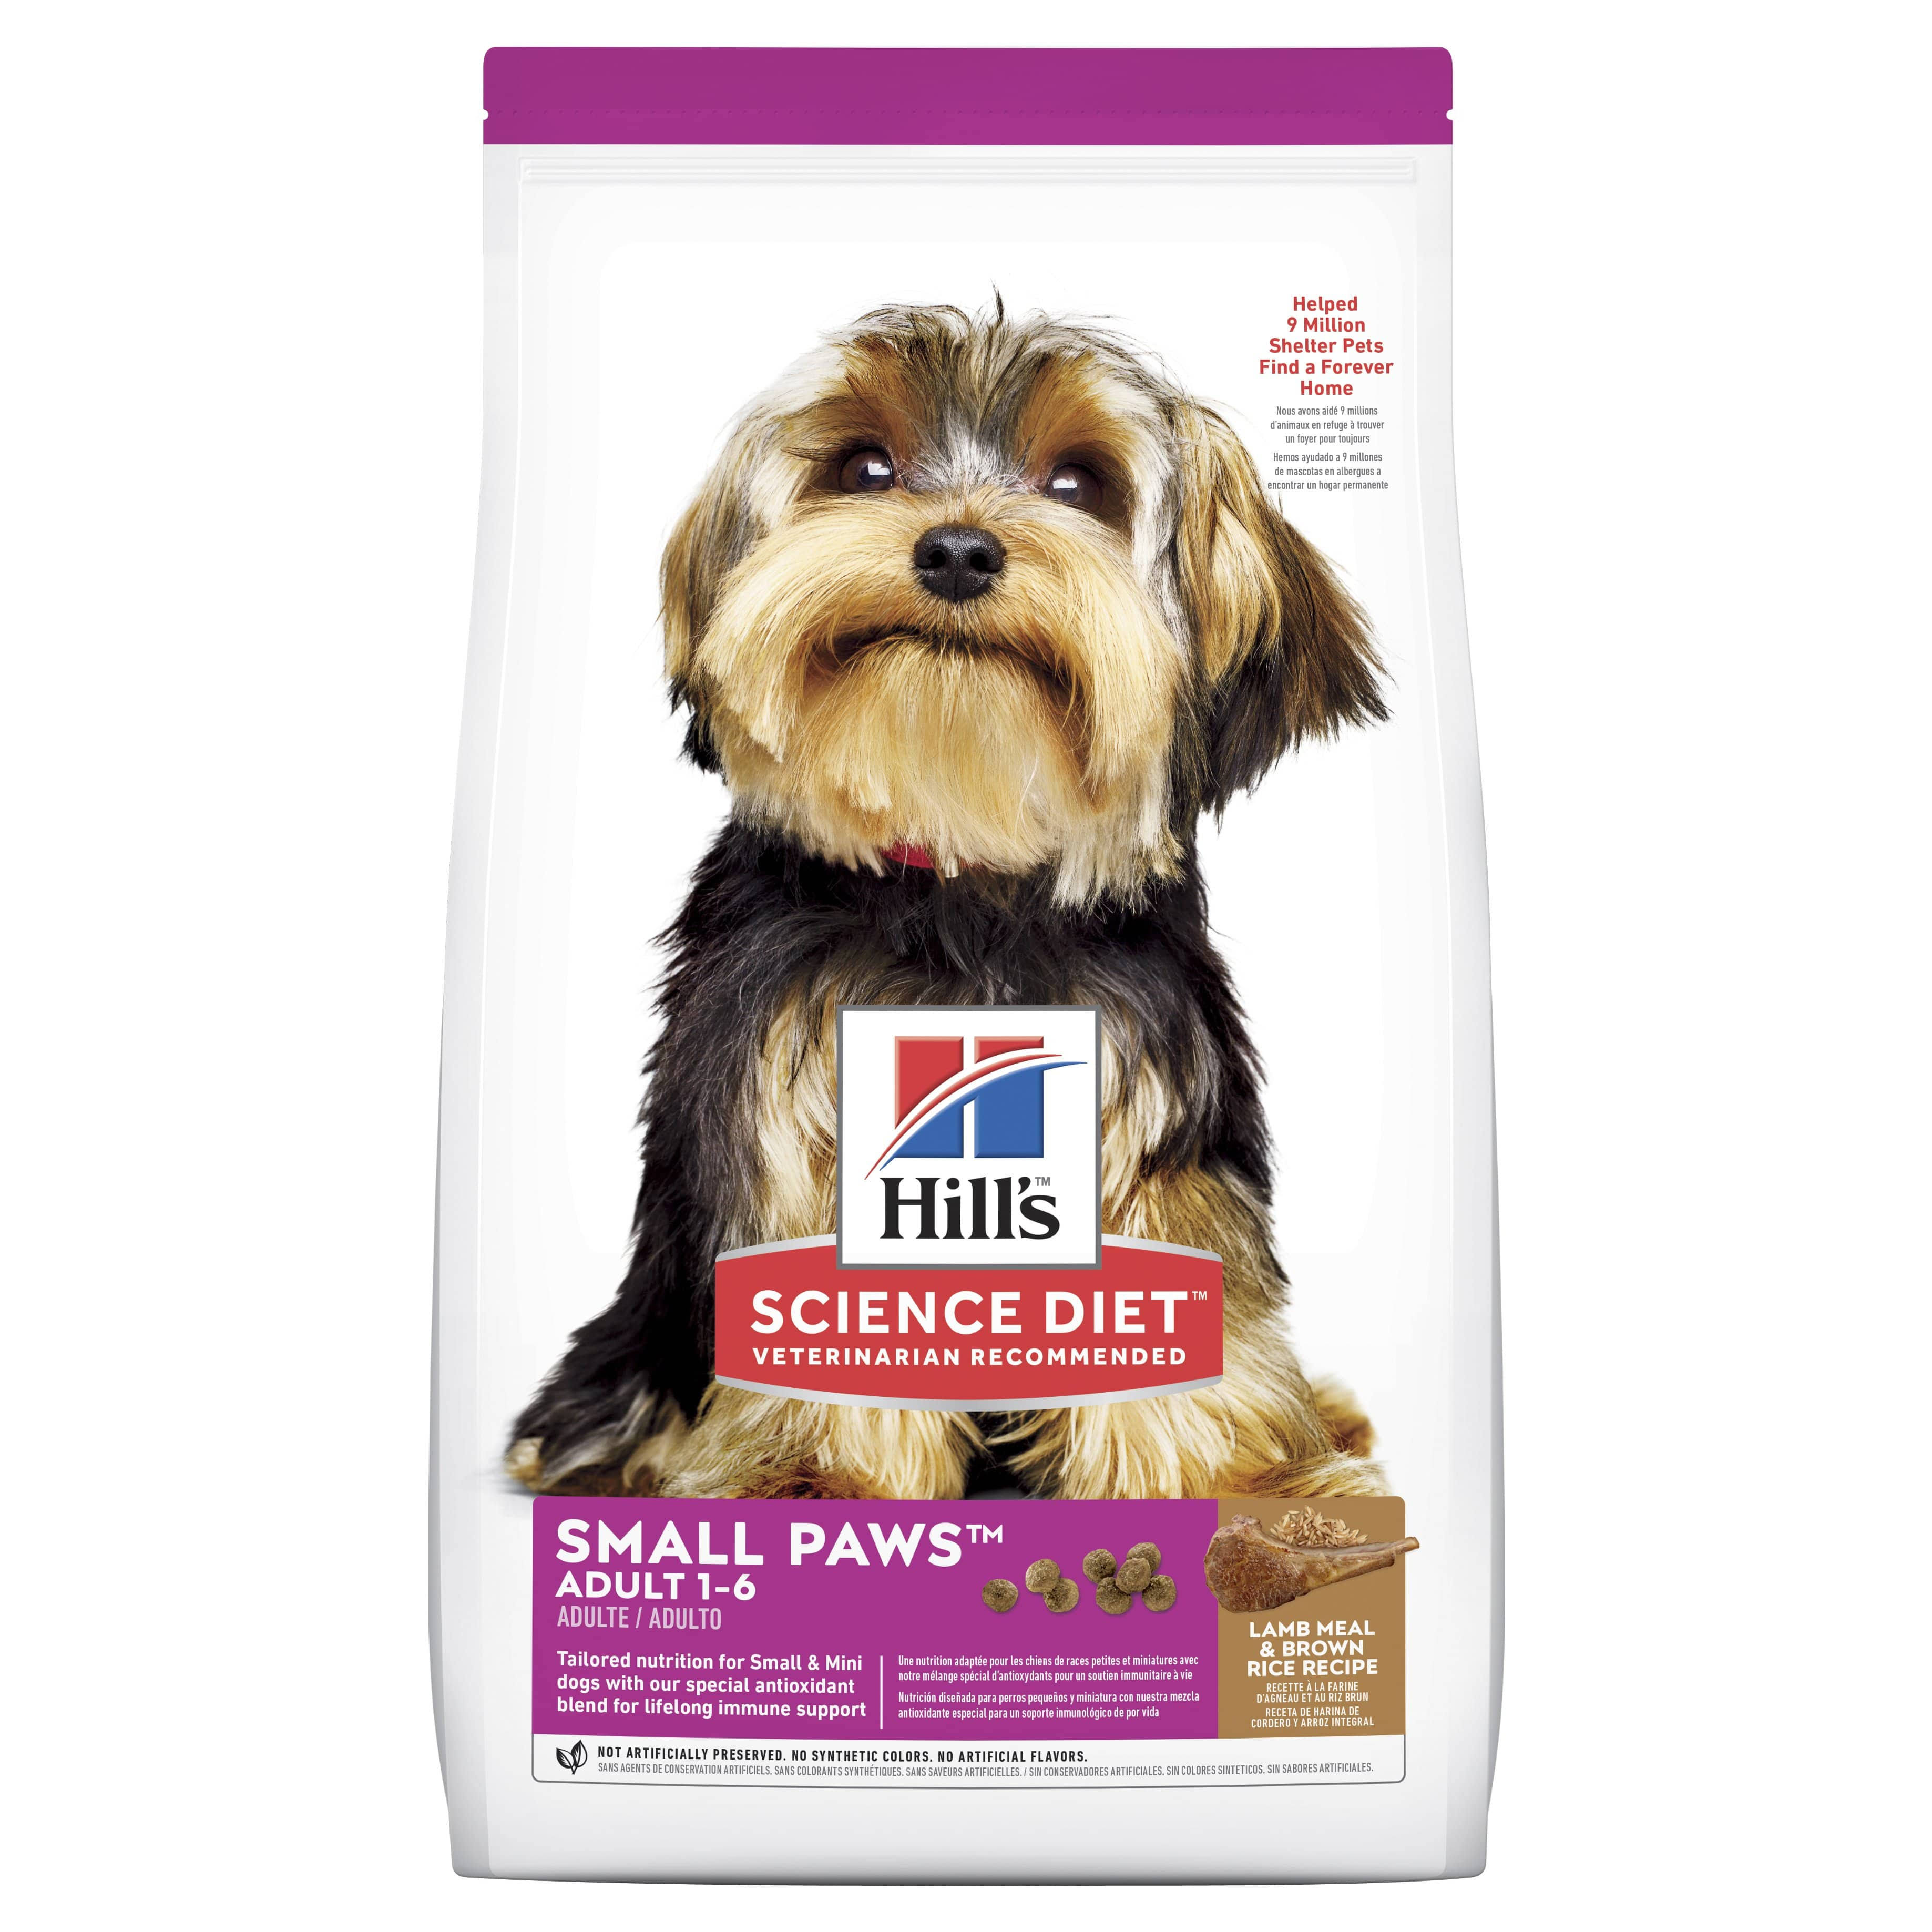 Hill's Science Diet Dog Food - Small & Toy Breed, Dry, Lamb Meal & Rice Recipe, 4.5lbs